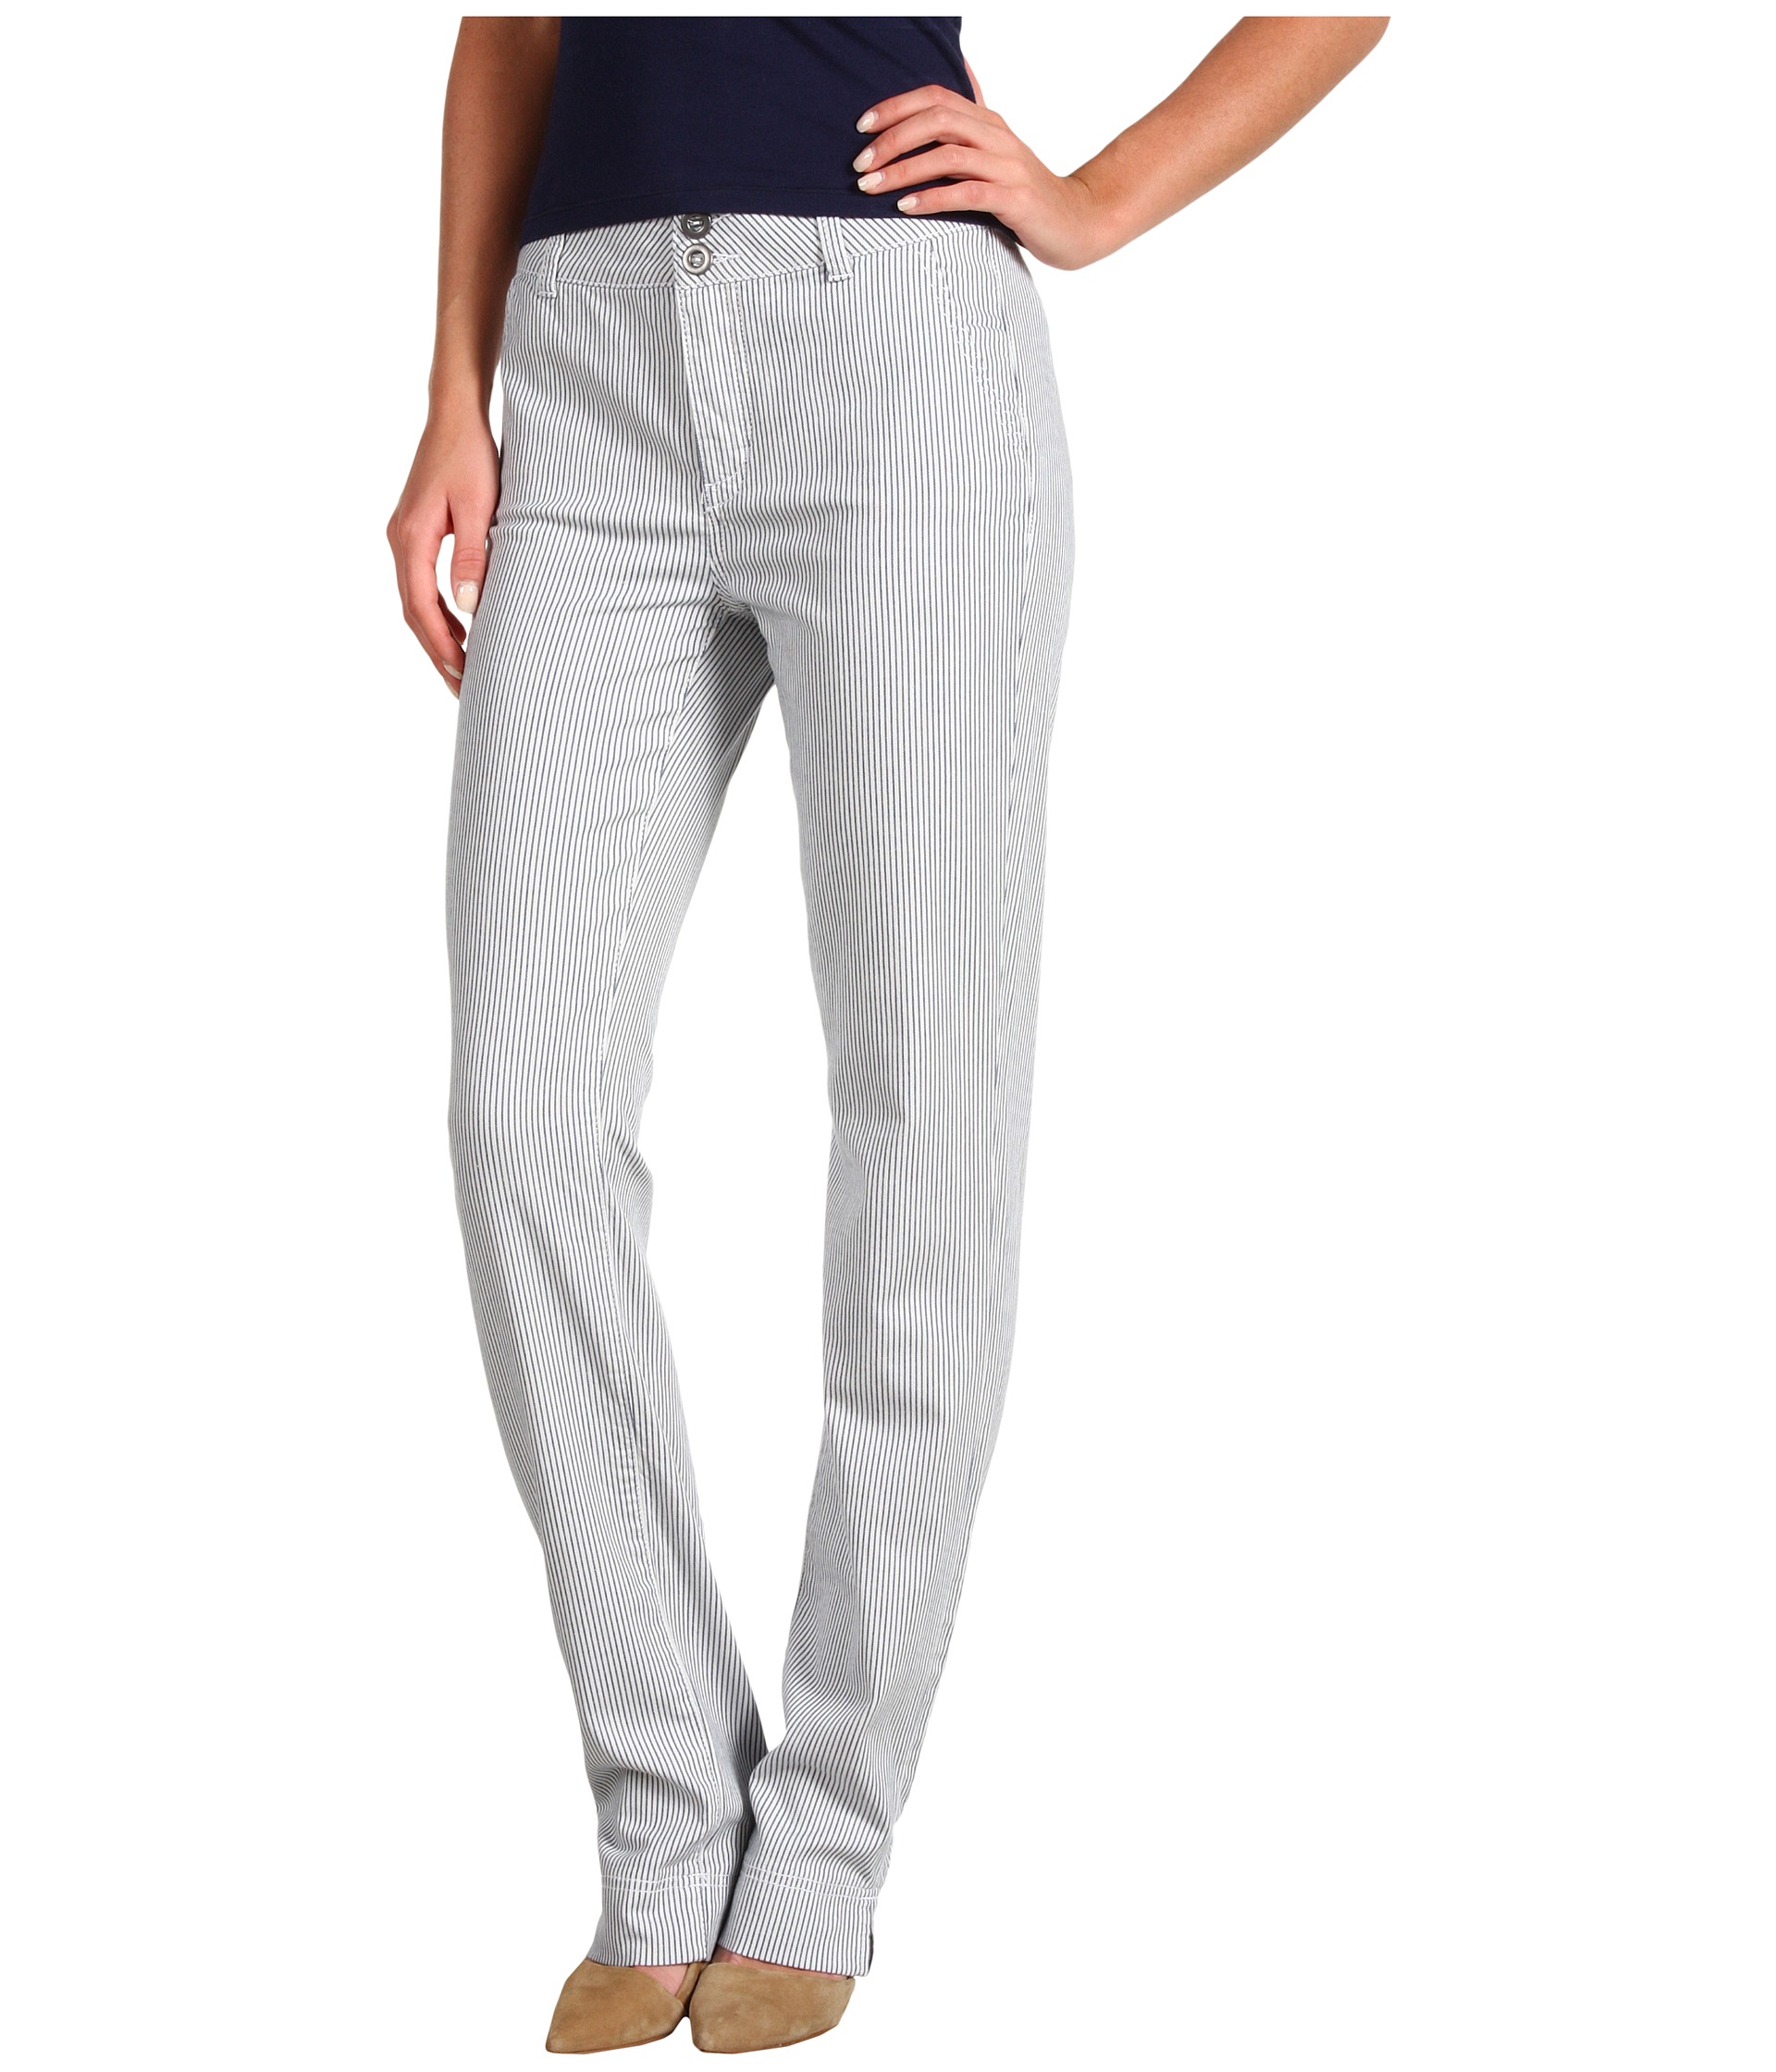 Miraclebody Jeans Thelma Legging Corduroy $106.00 Miraclebody Jeans 